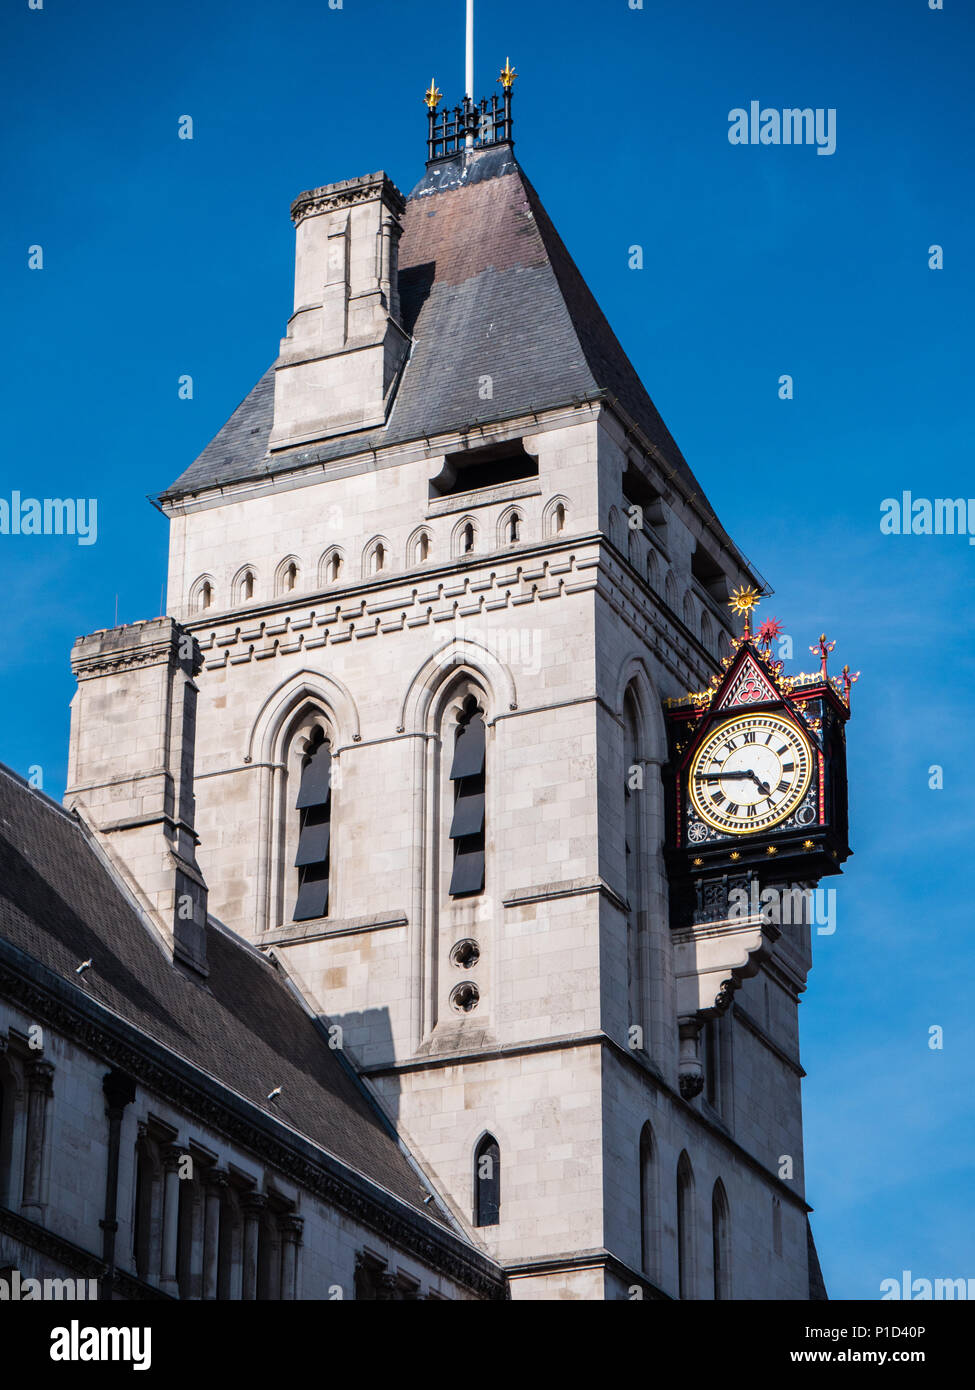 Clocktower, The High Court, Royal Courts Of Justice, London, England, UK, GB. Stock Photo